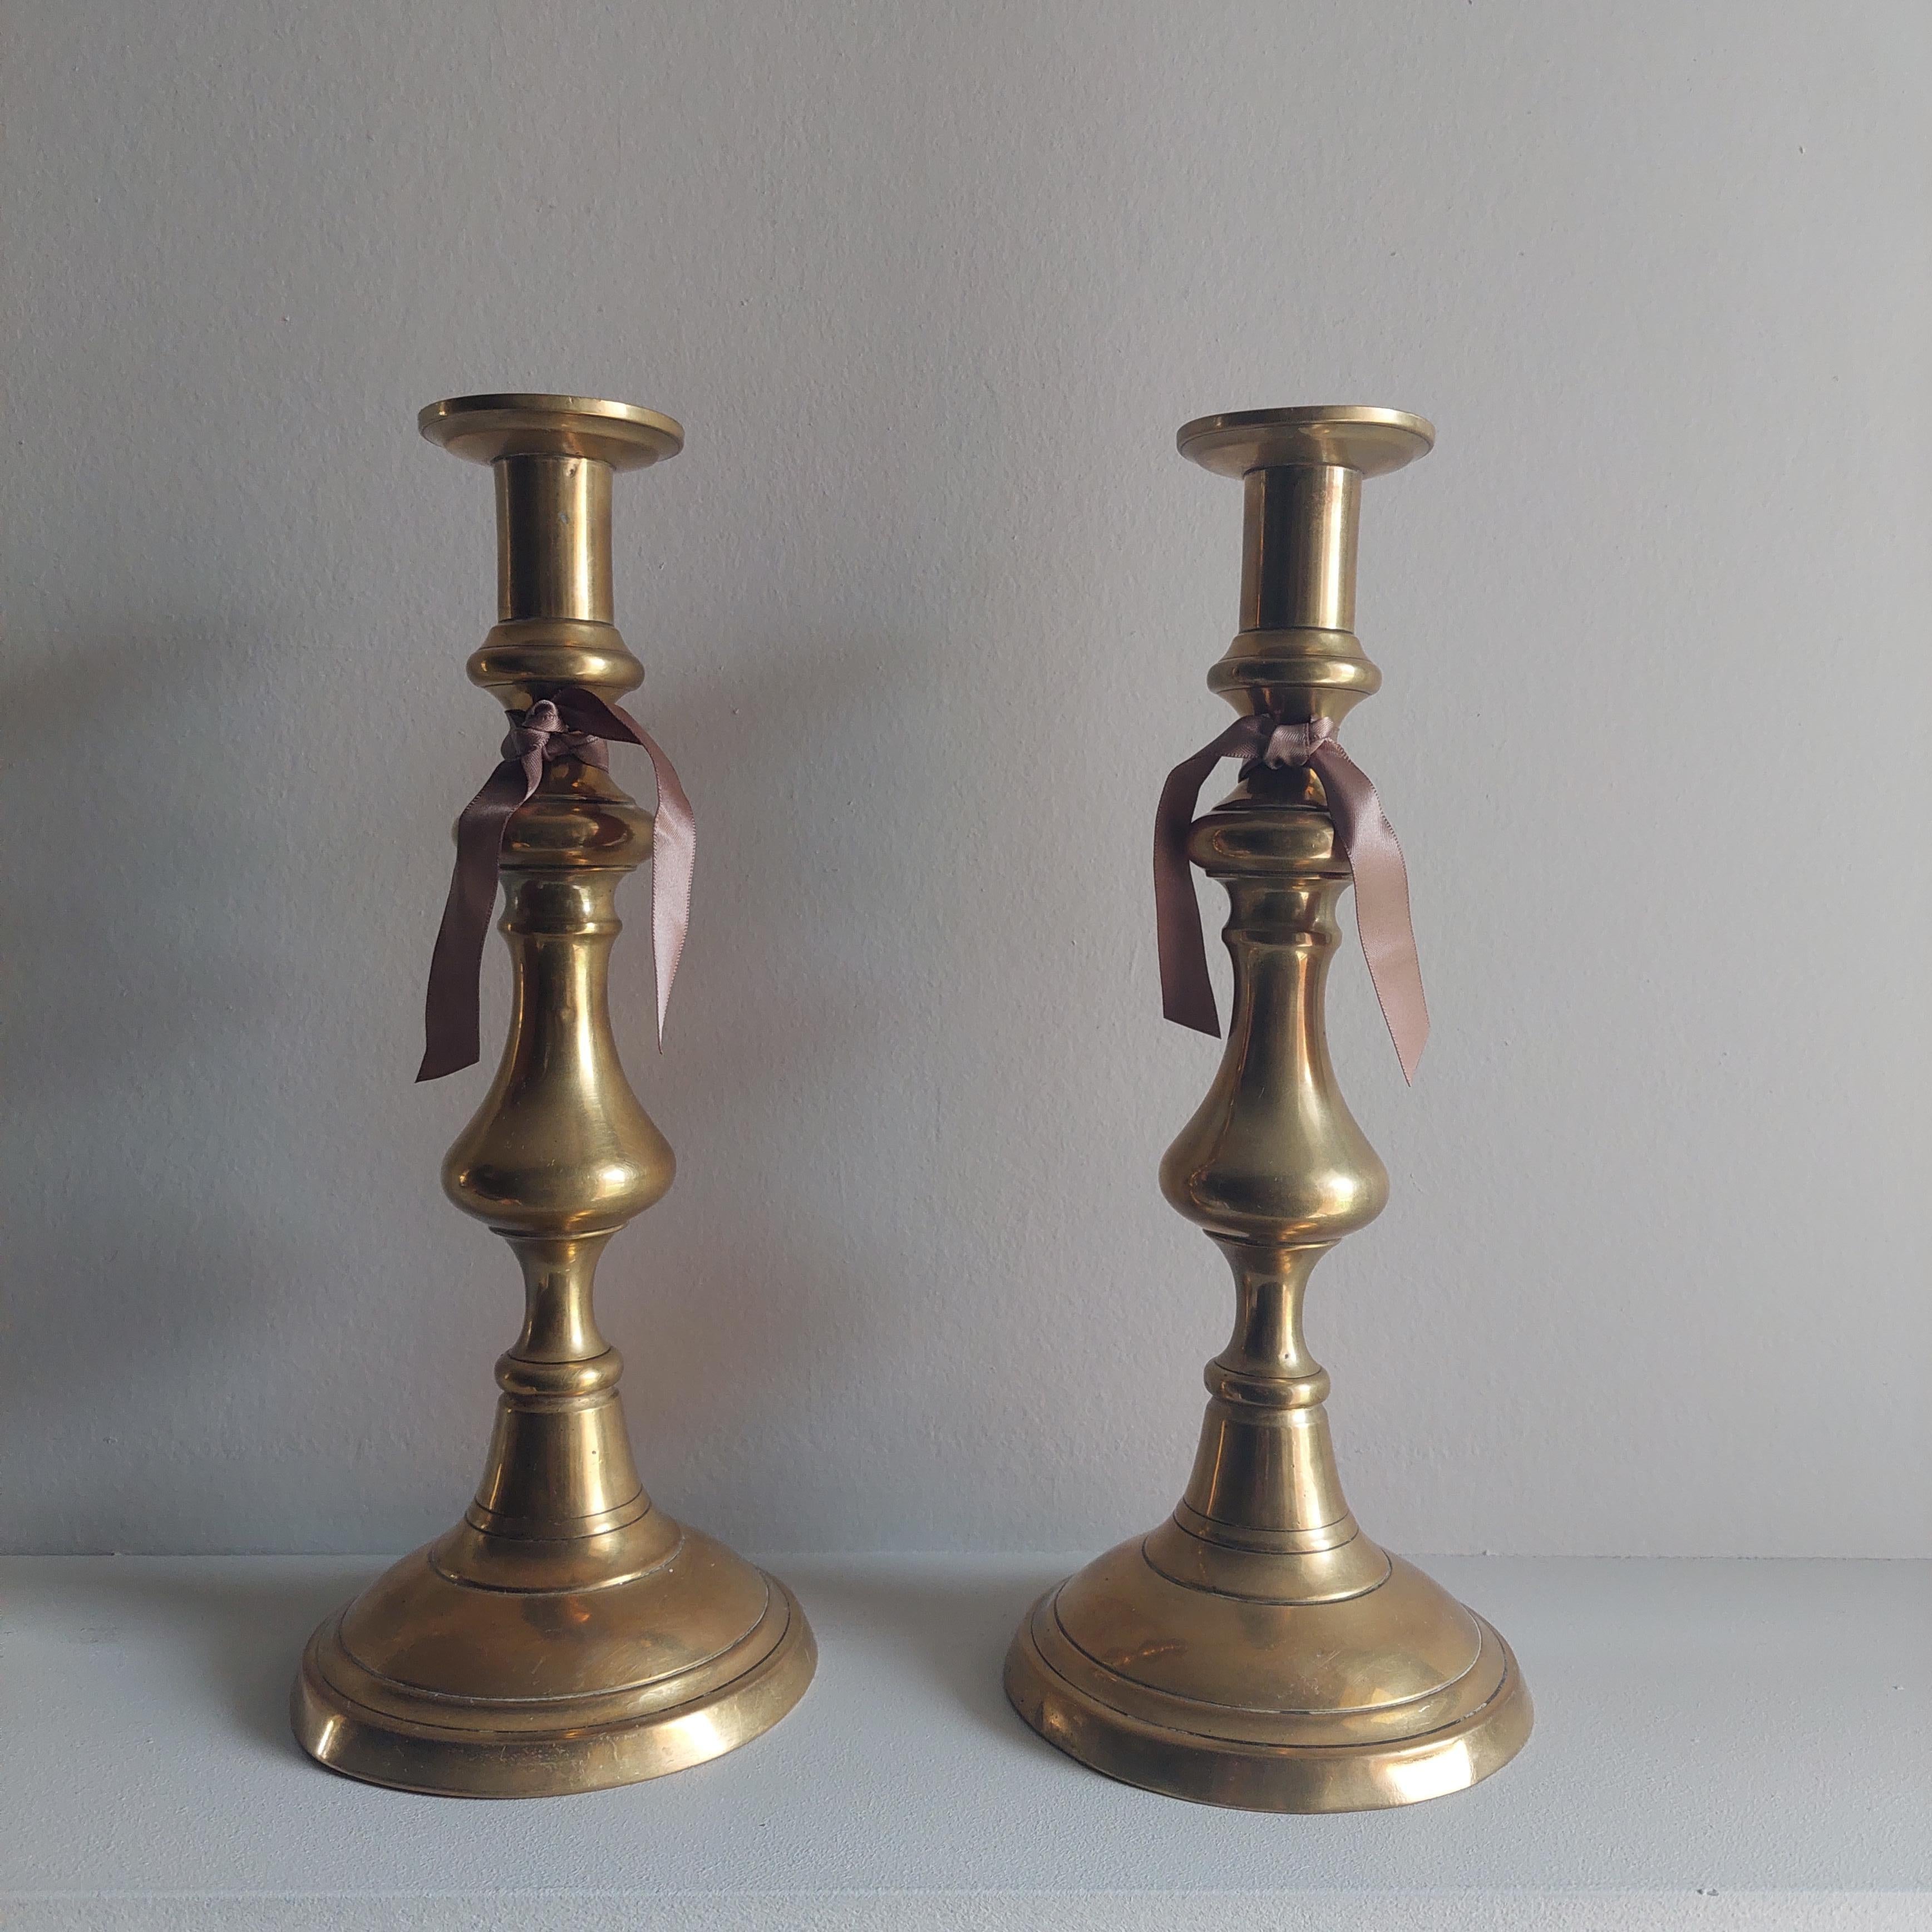 High Victorian Victorian Vintage Large Brass Candlesticks Candle Holders, Set Of 2, 1800s